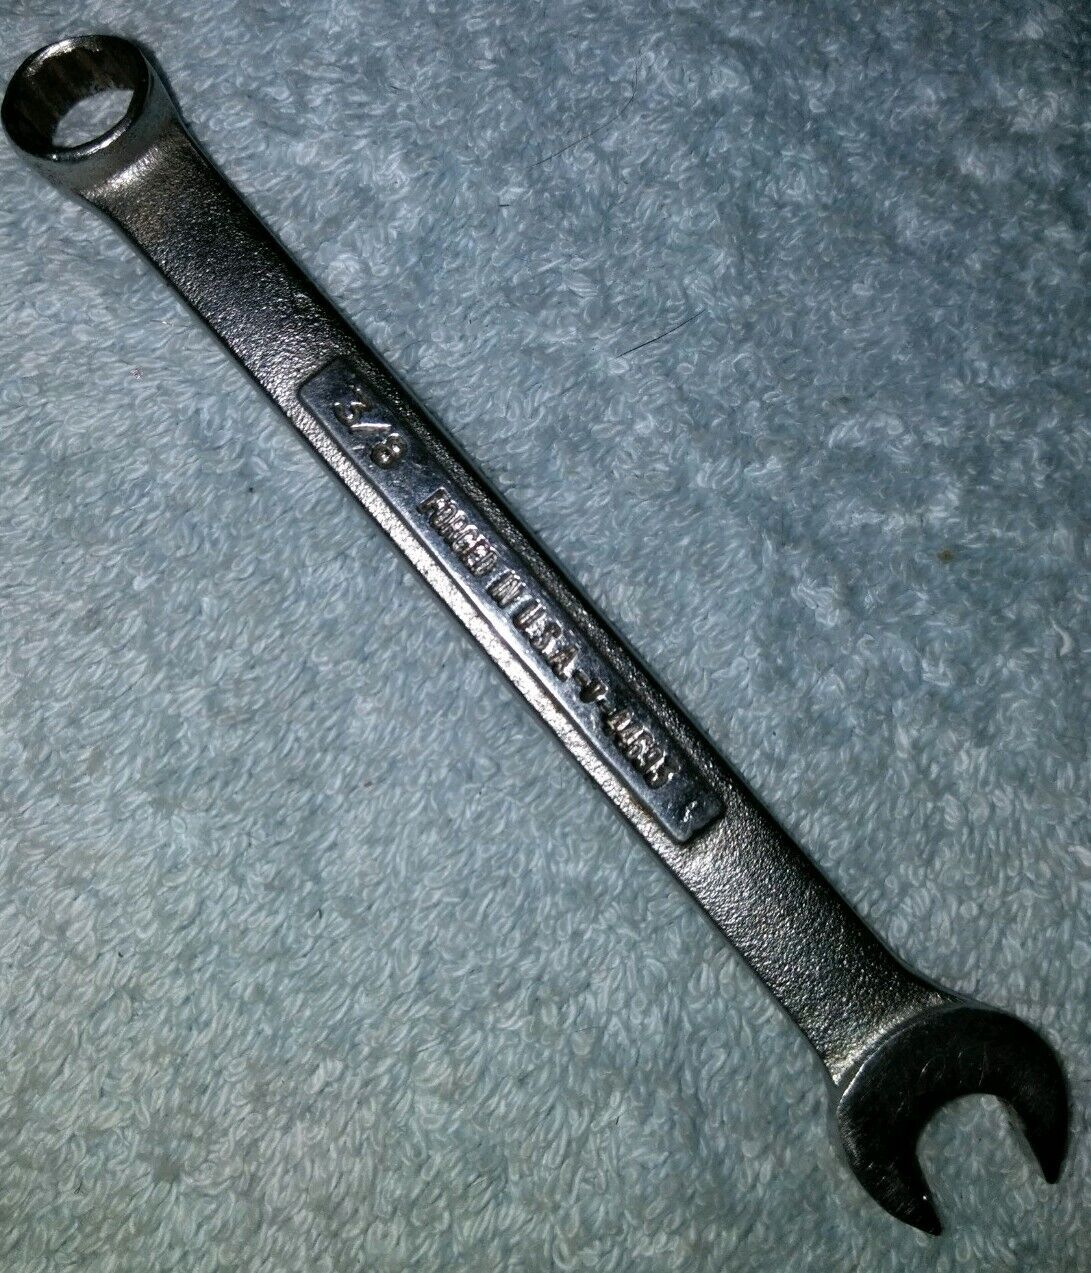 Craftsman 3/8 combination Wrench -v- 44693 12 point USA